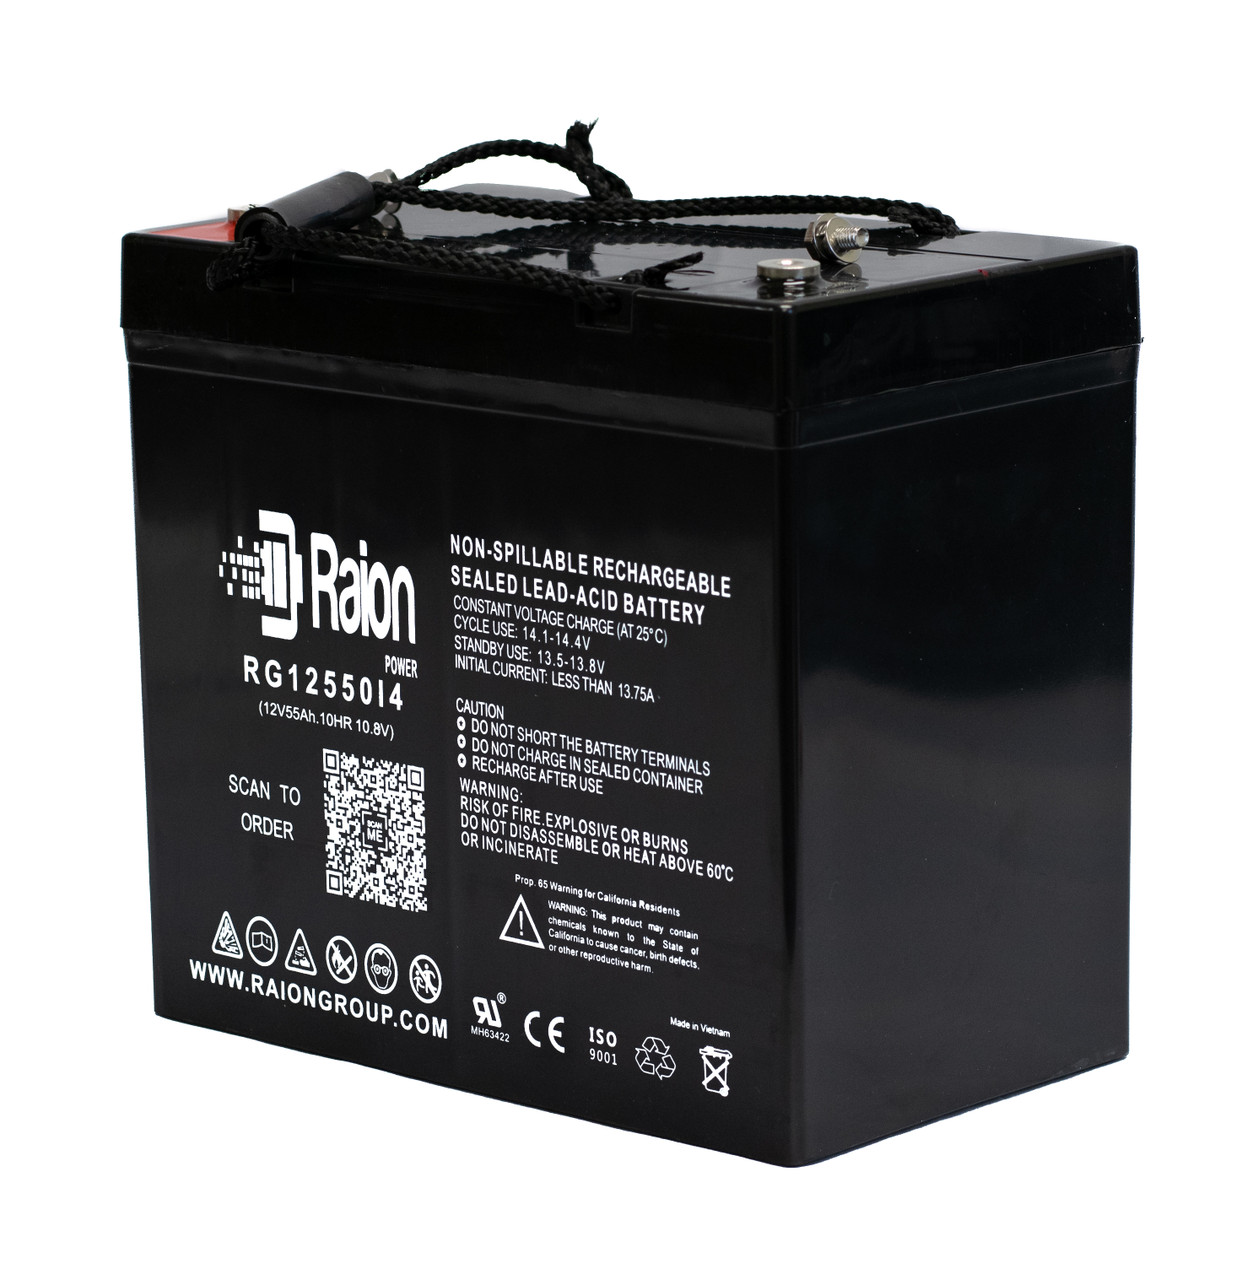 Raion Power 12V 55Ah 22NF Mobility Scooter Battery Replacement for Quickie V100